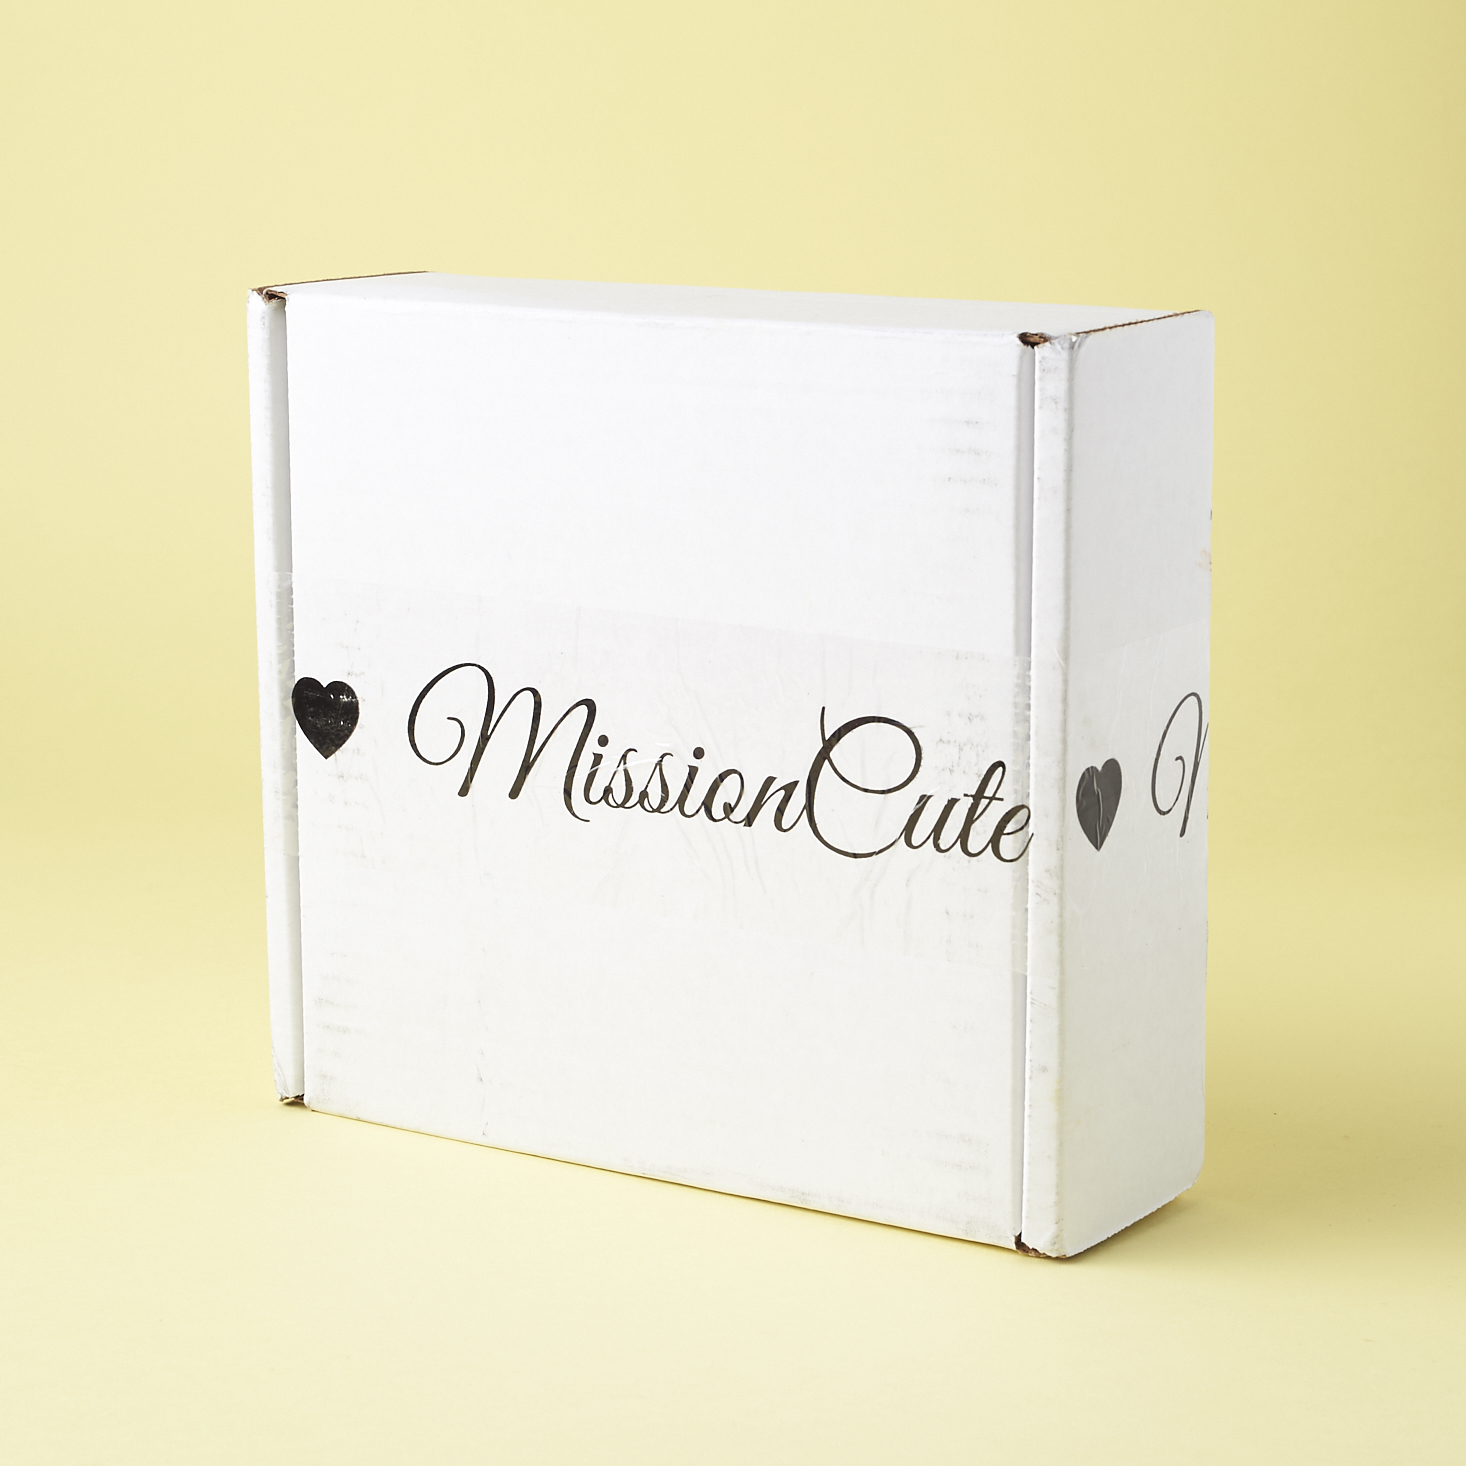 Check out what's inside the January 2017 Mission Cute box!